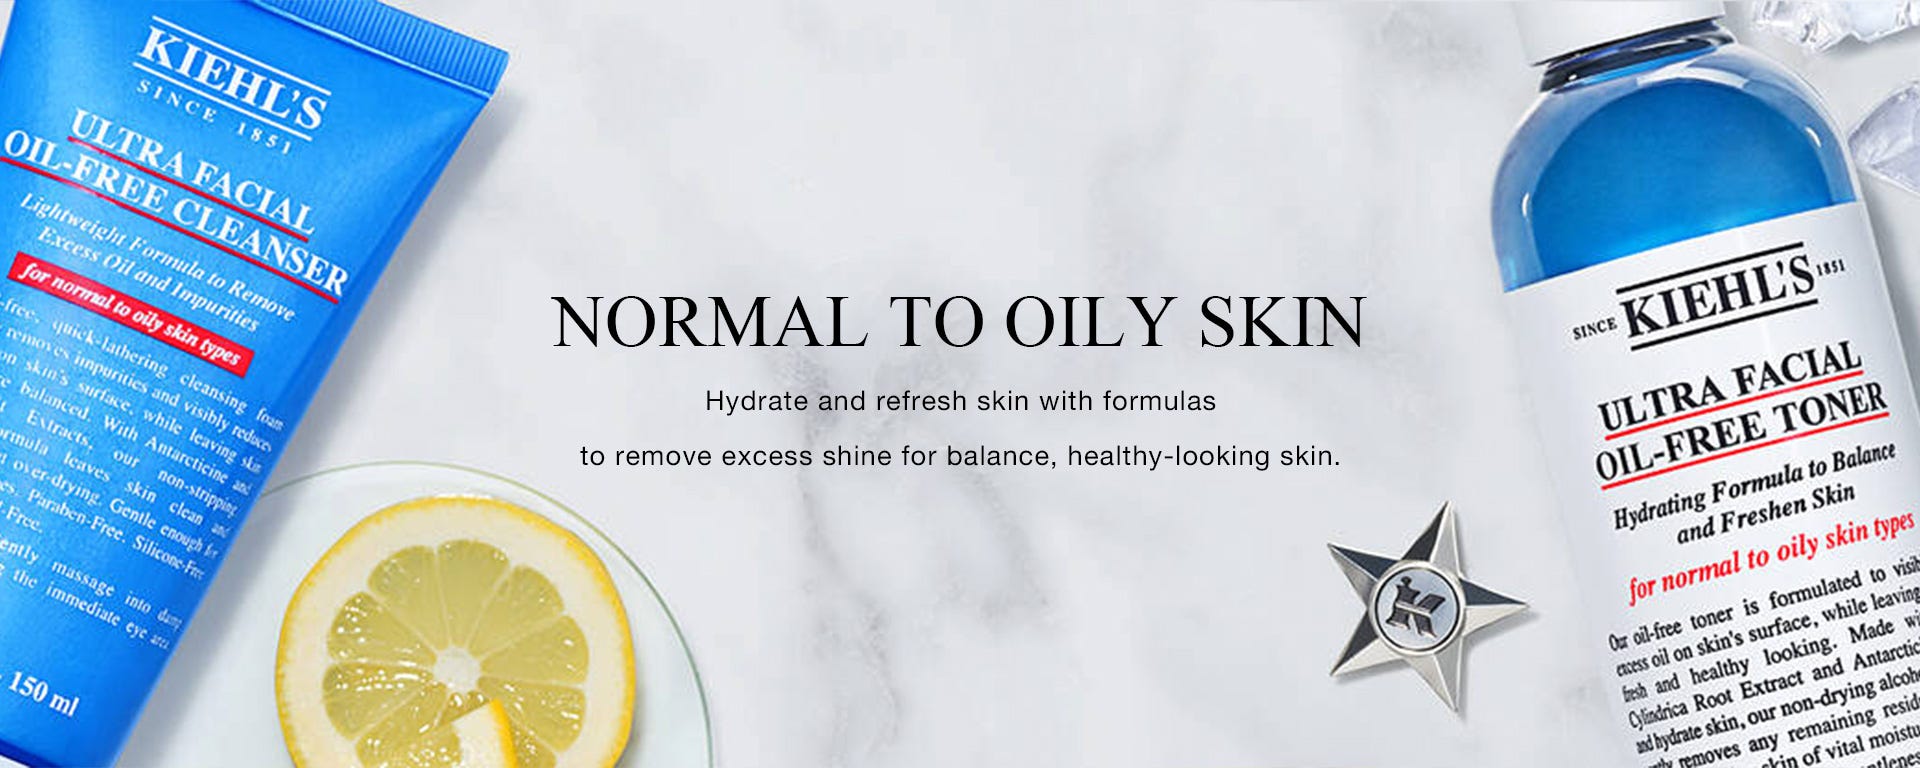 NORMAL TO OILY SKIN